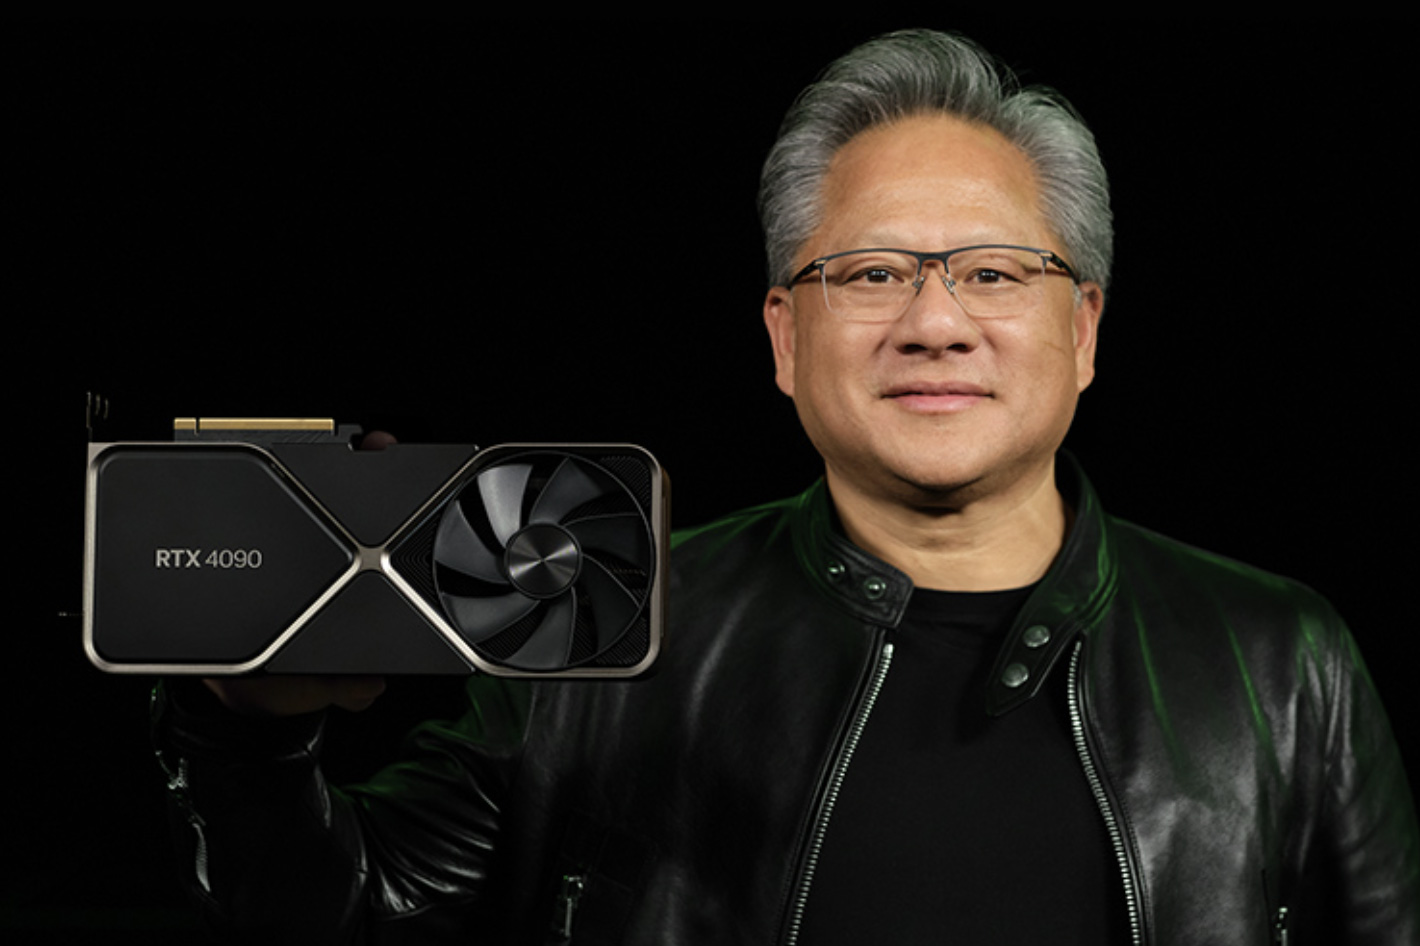 The new GeForce RTX 40 graphics cards are up to 4X faster